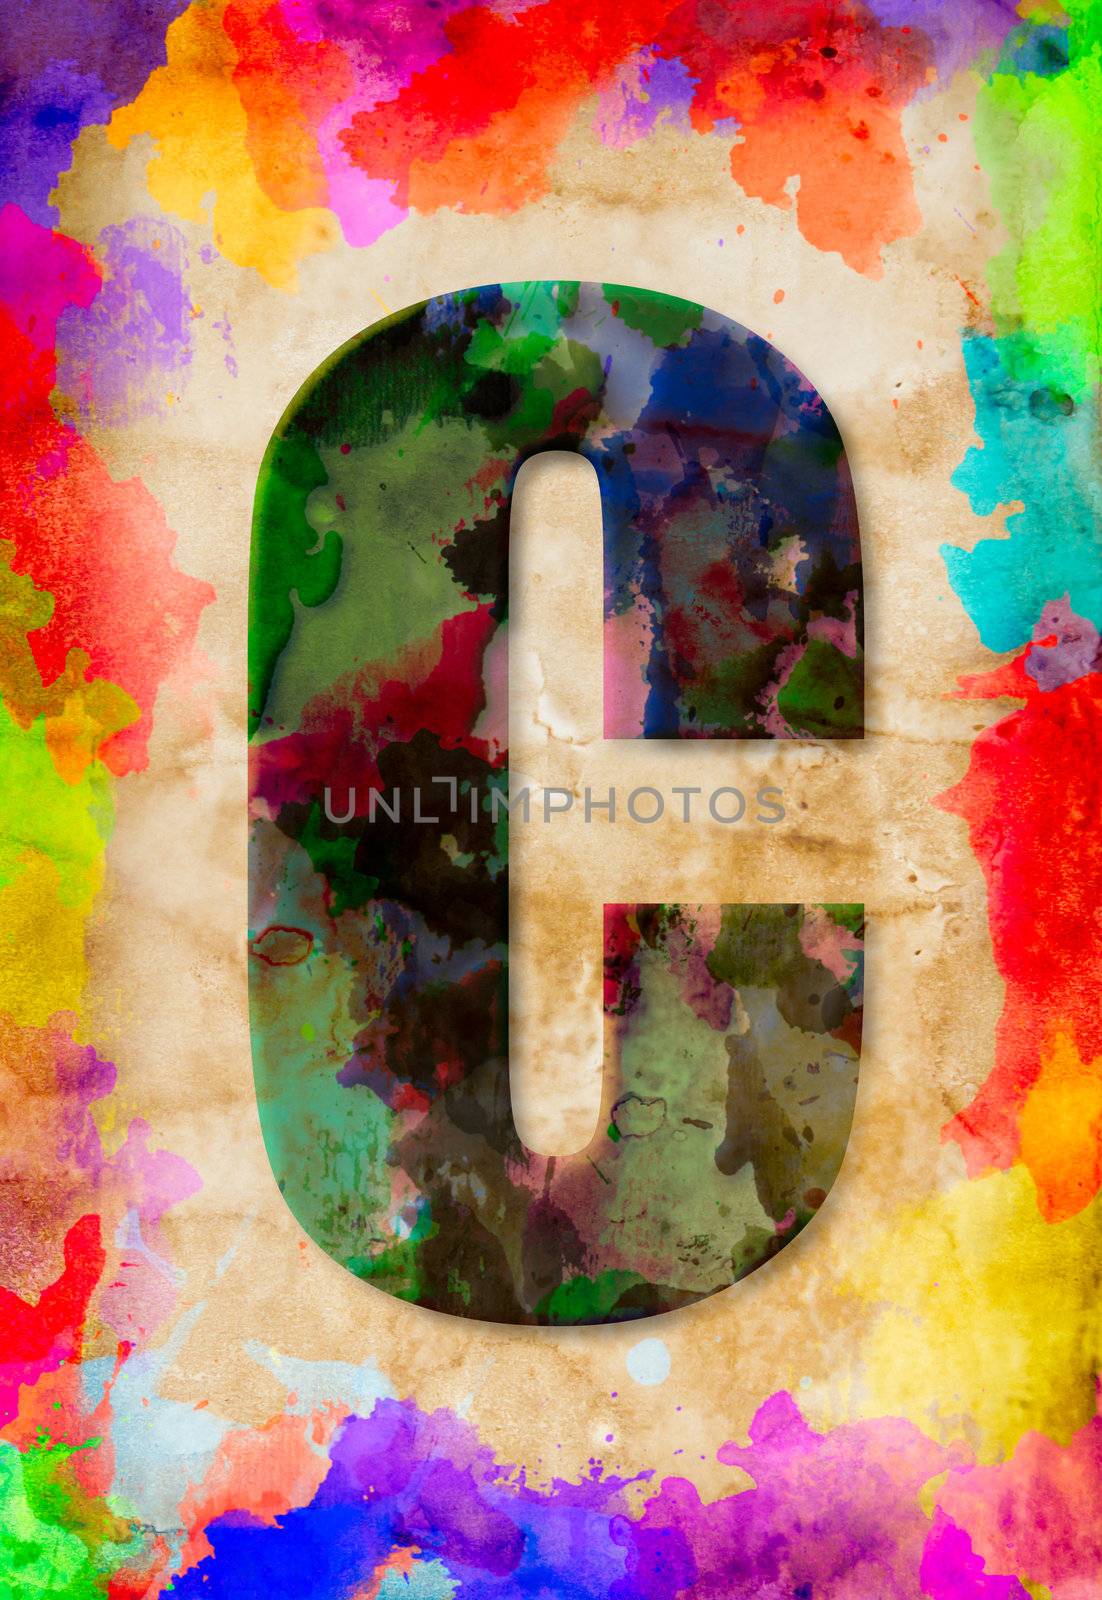 Letter C watercolor on vintage paper by tungphoto